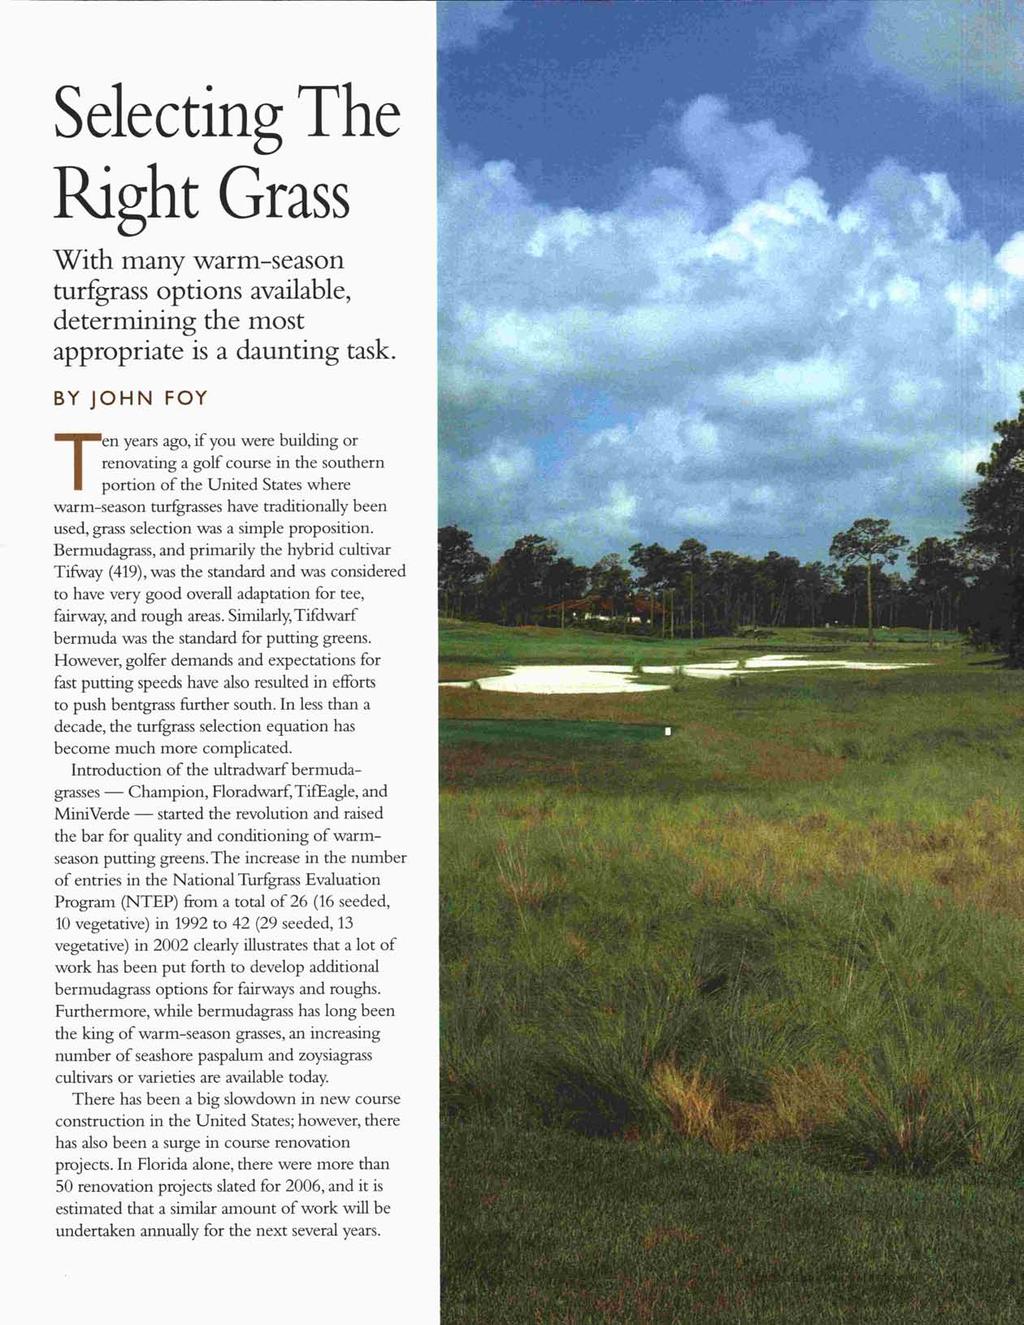 Selecting The Right Grass With many warm-season turfgrass options available, determining the most appropriate is a daunting task.